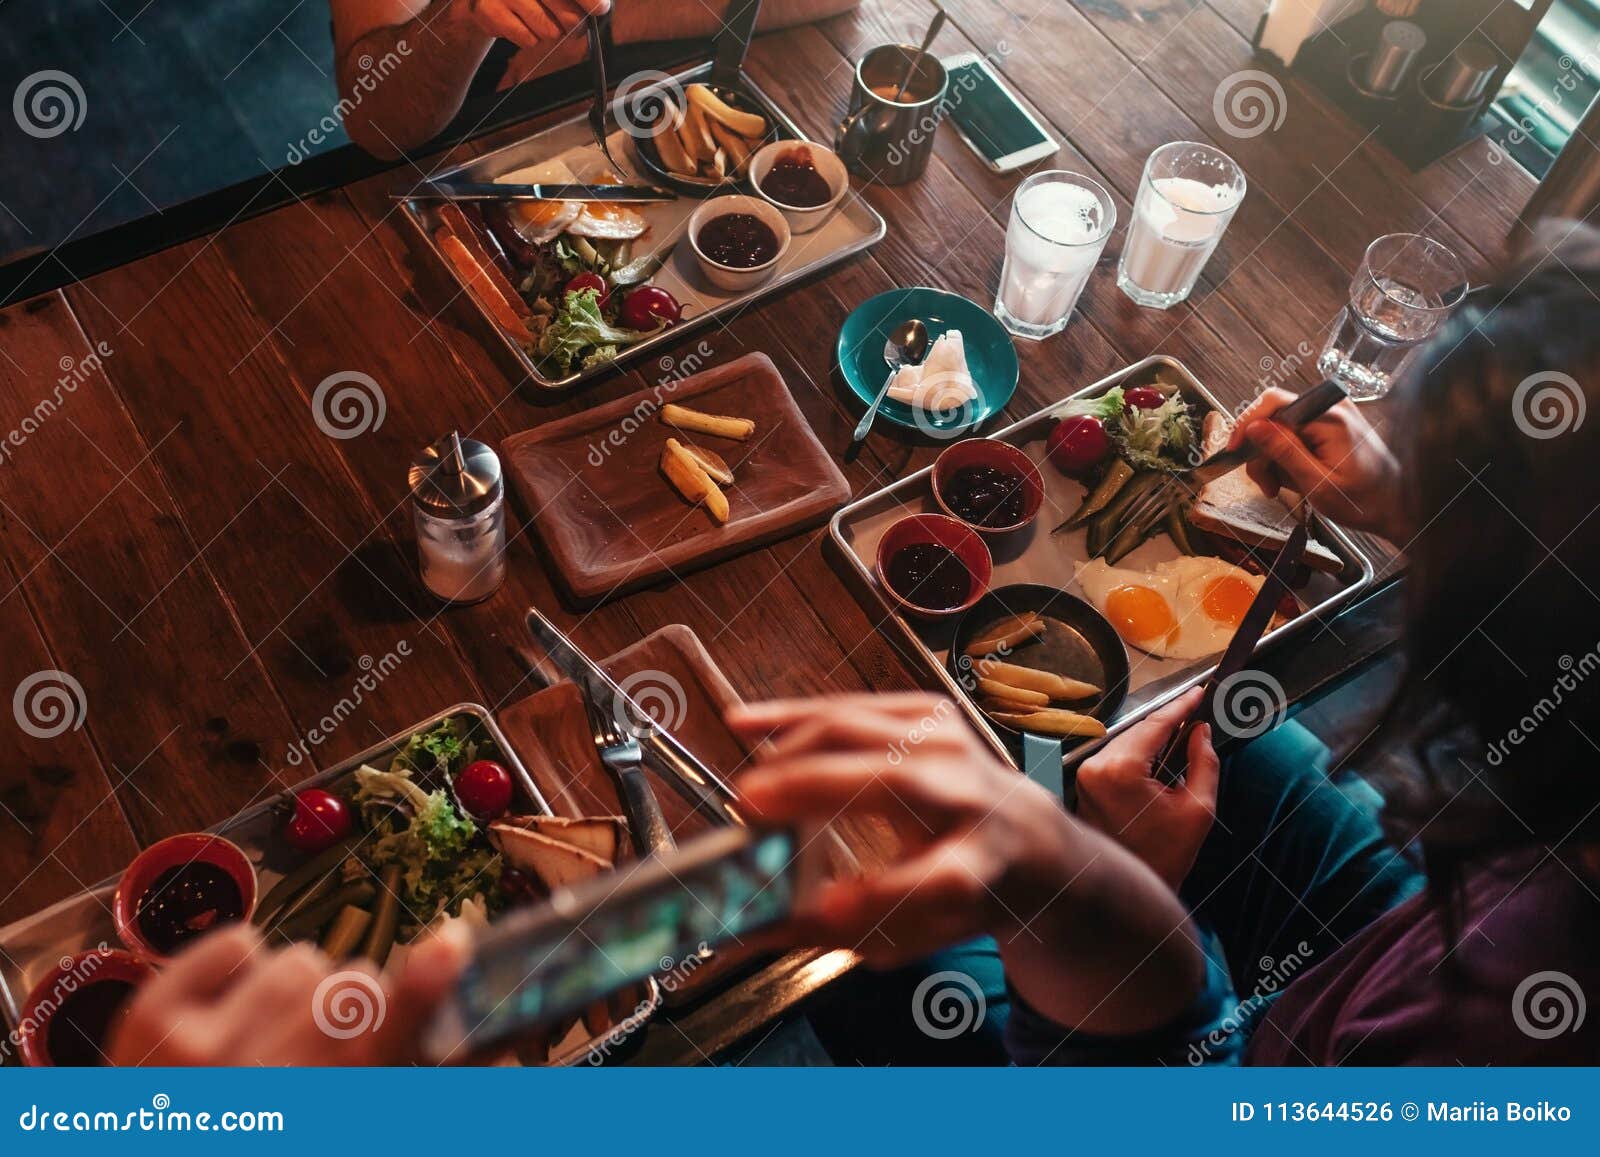 young man takes a picture of his food for social network while having breakfast in cafe. internet addiction concept.